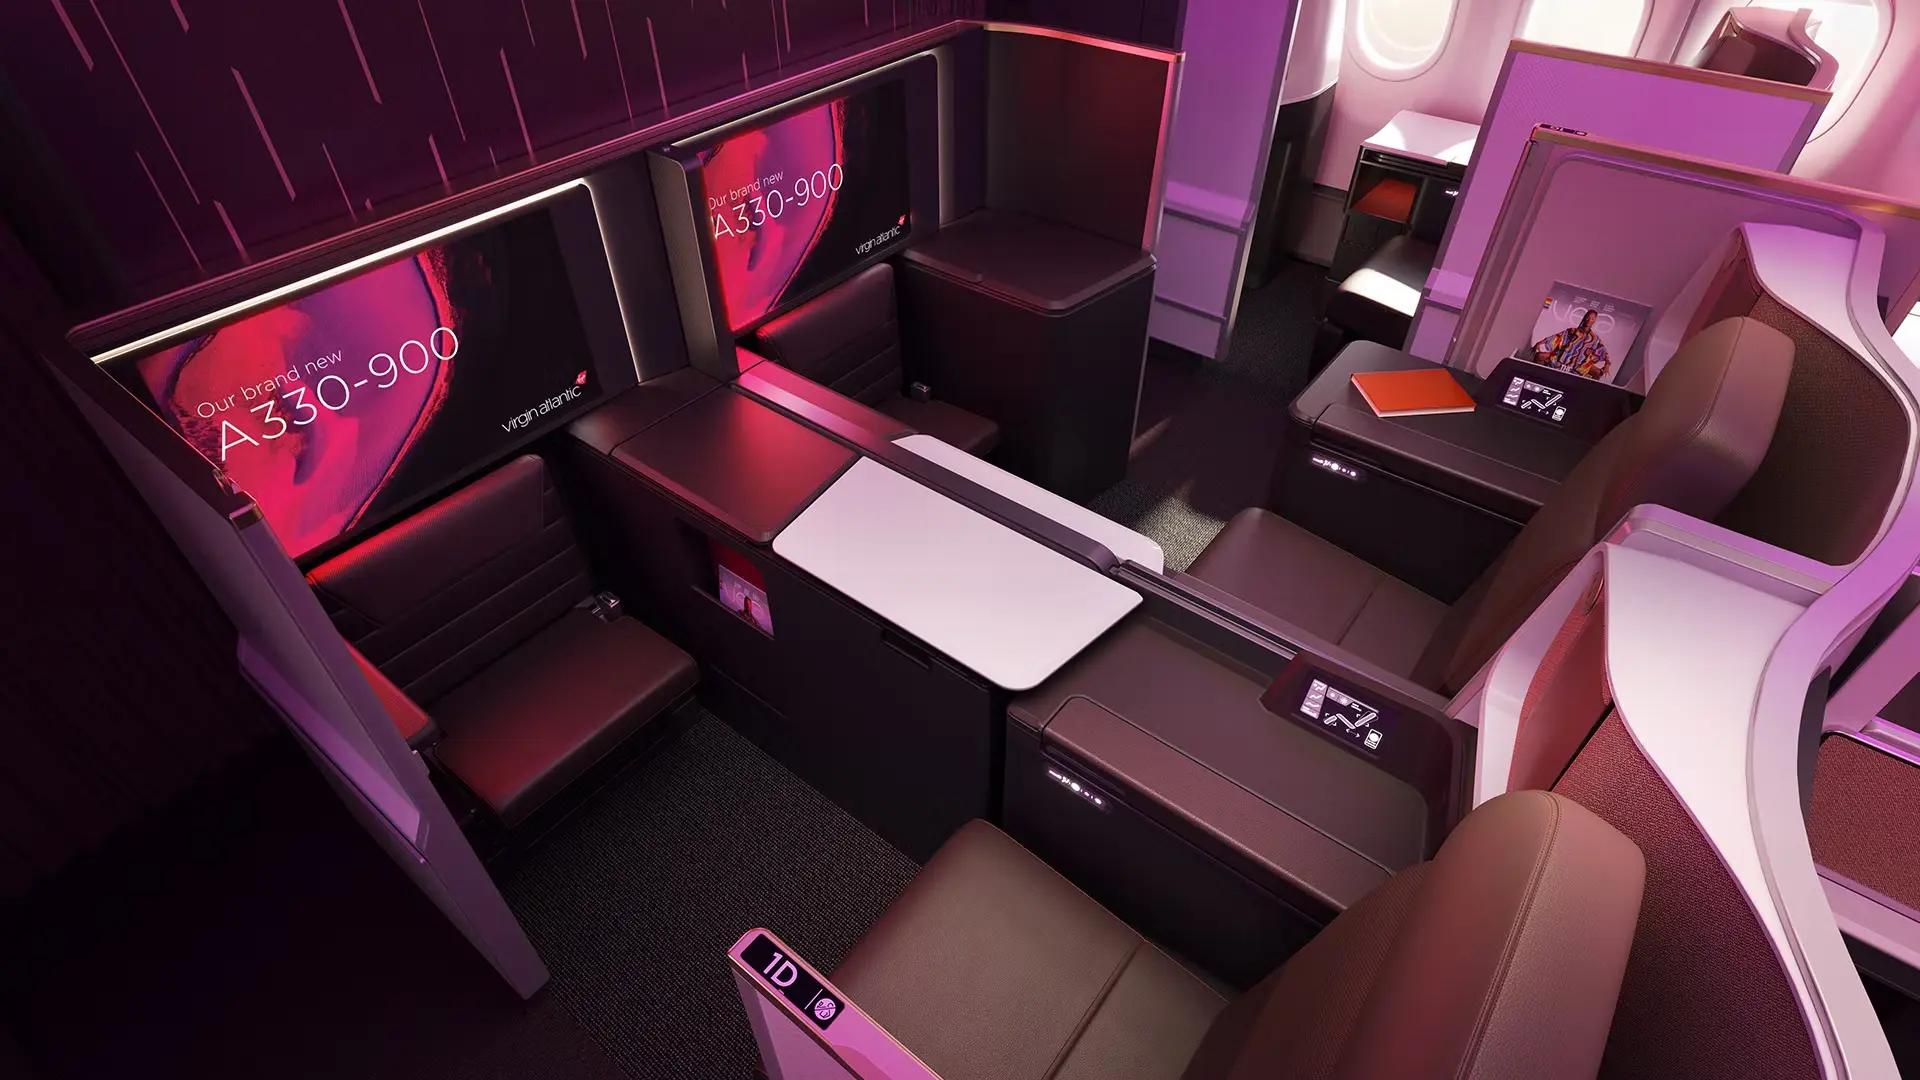 two Virgin atlantic retreat suites at businessclass with a brown leather finish. And with A330-900 smart screens.